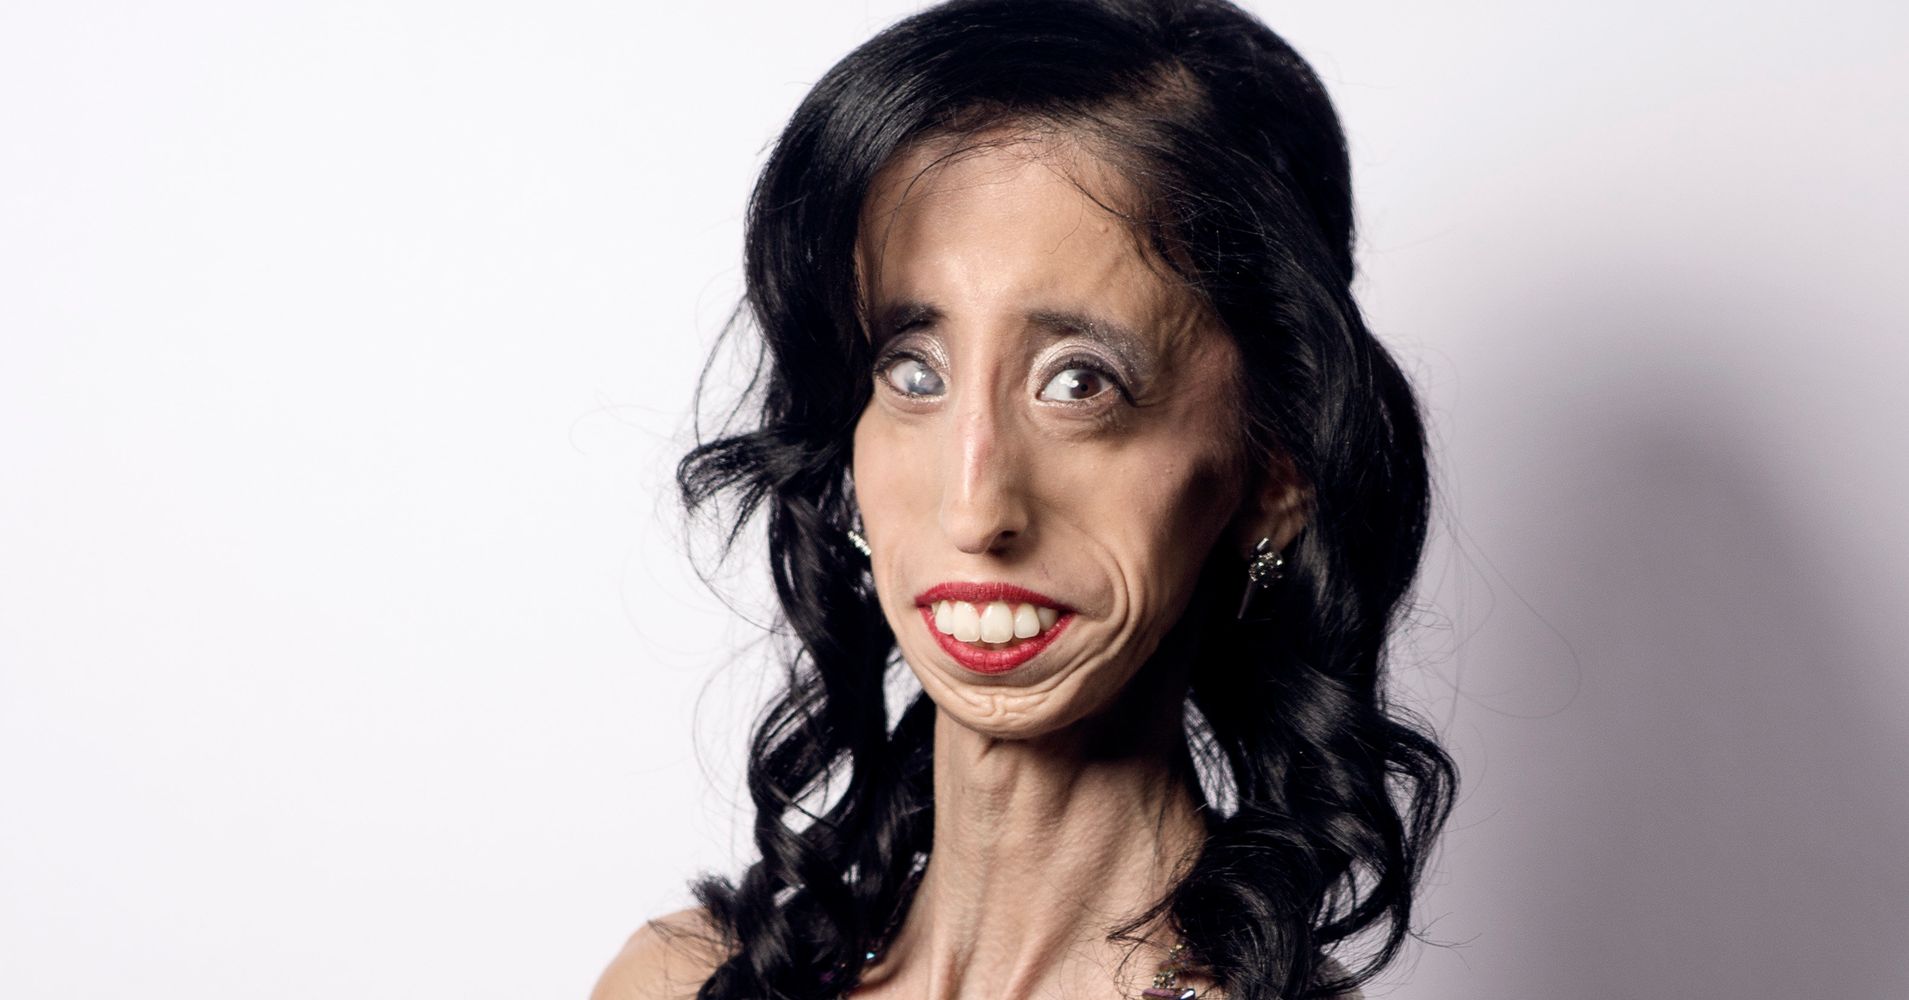 How Being Called The 'World's Ugliest Woman' Transformed Her Life